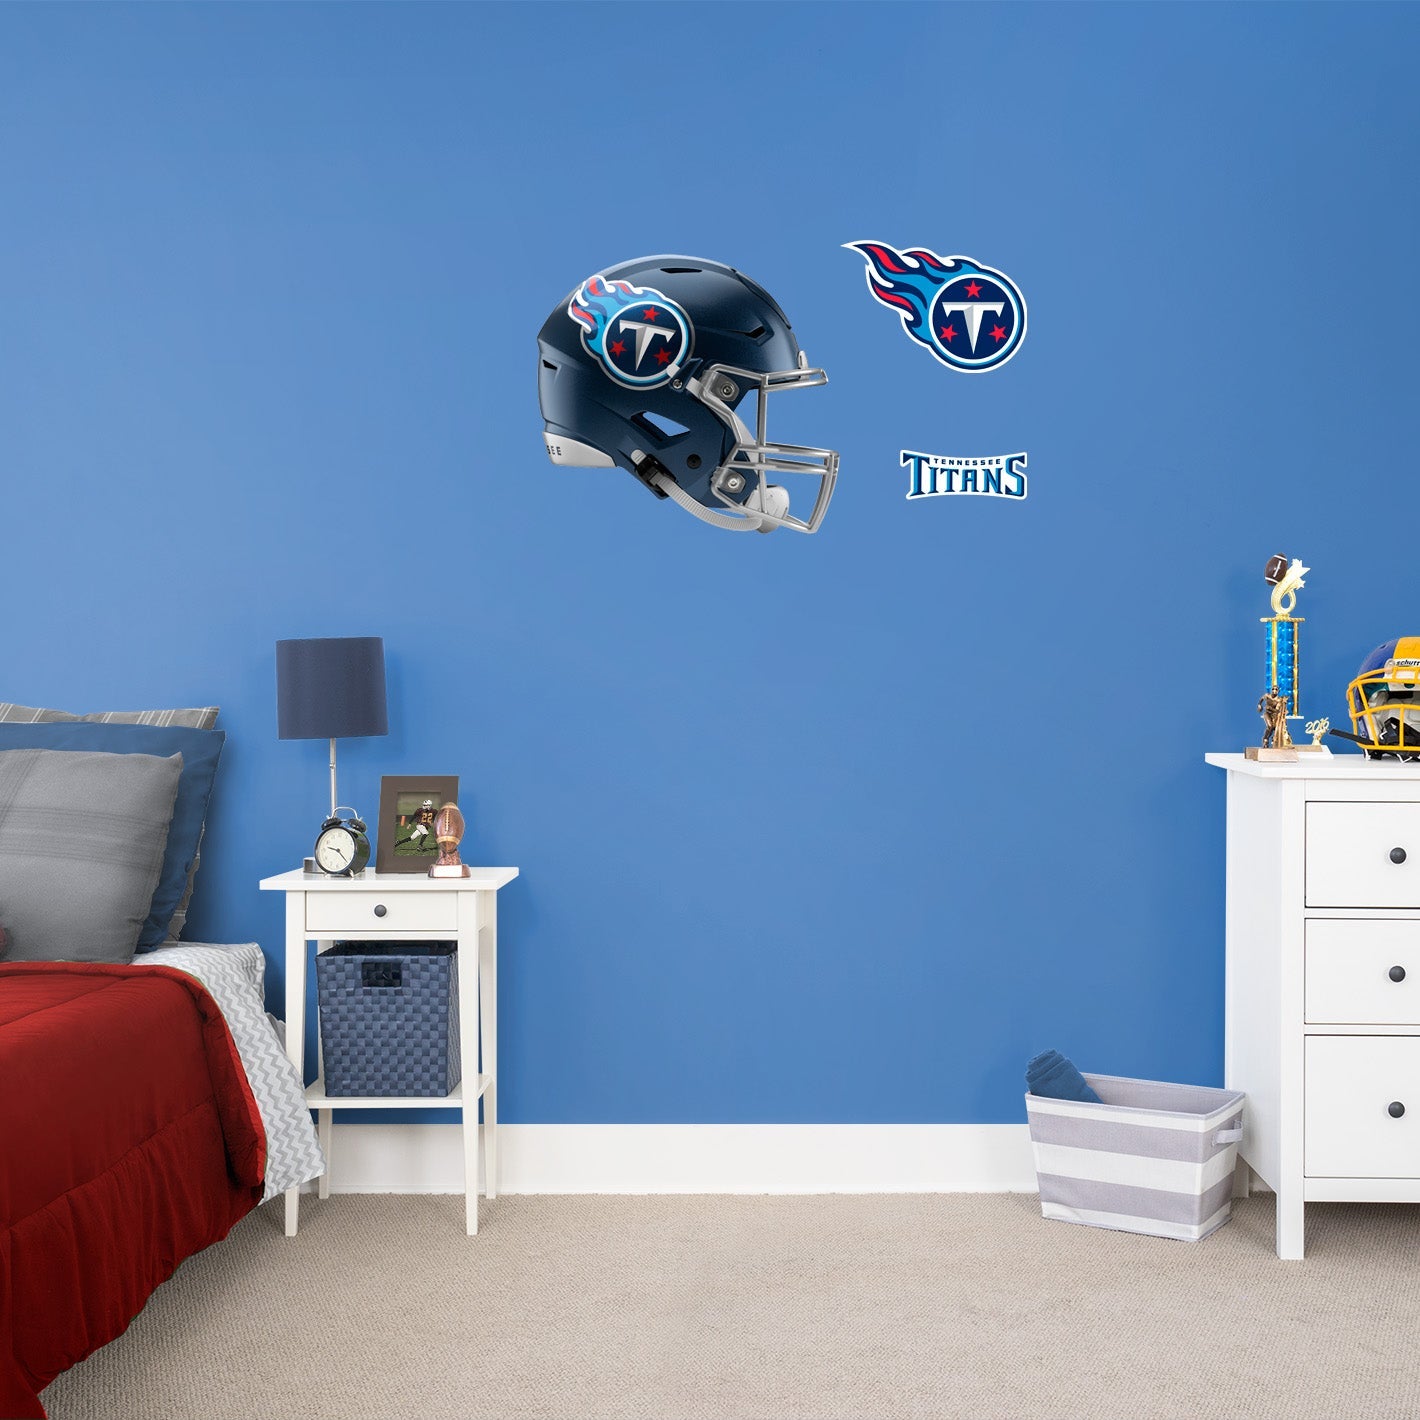 Tennessee Titans: Helmet - Officially Licensed NFL Removable Adhesive Decal